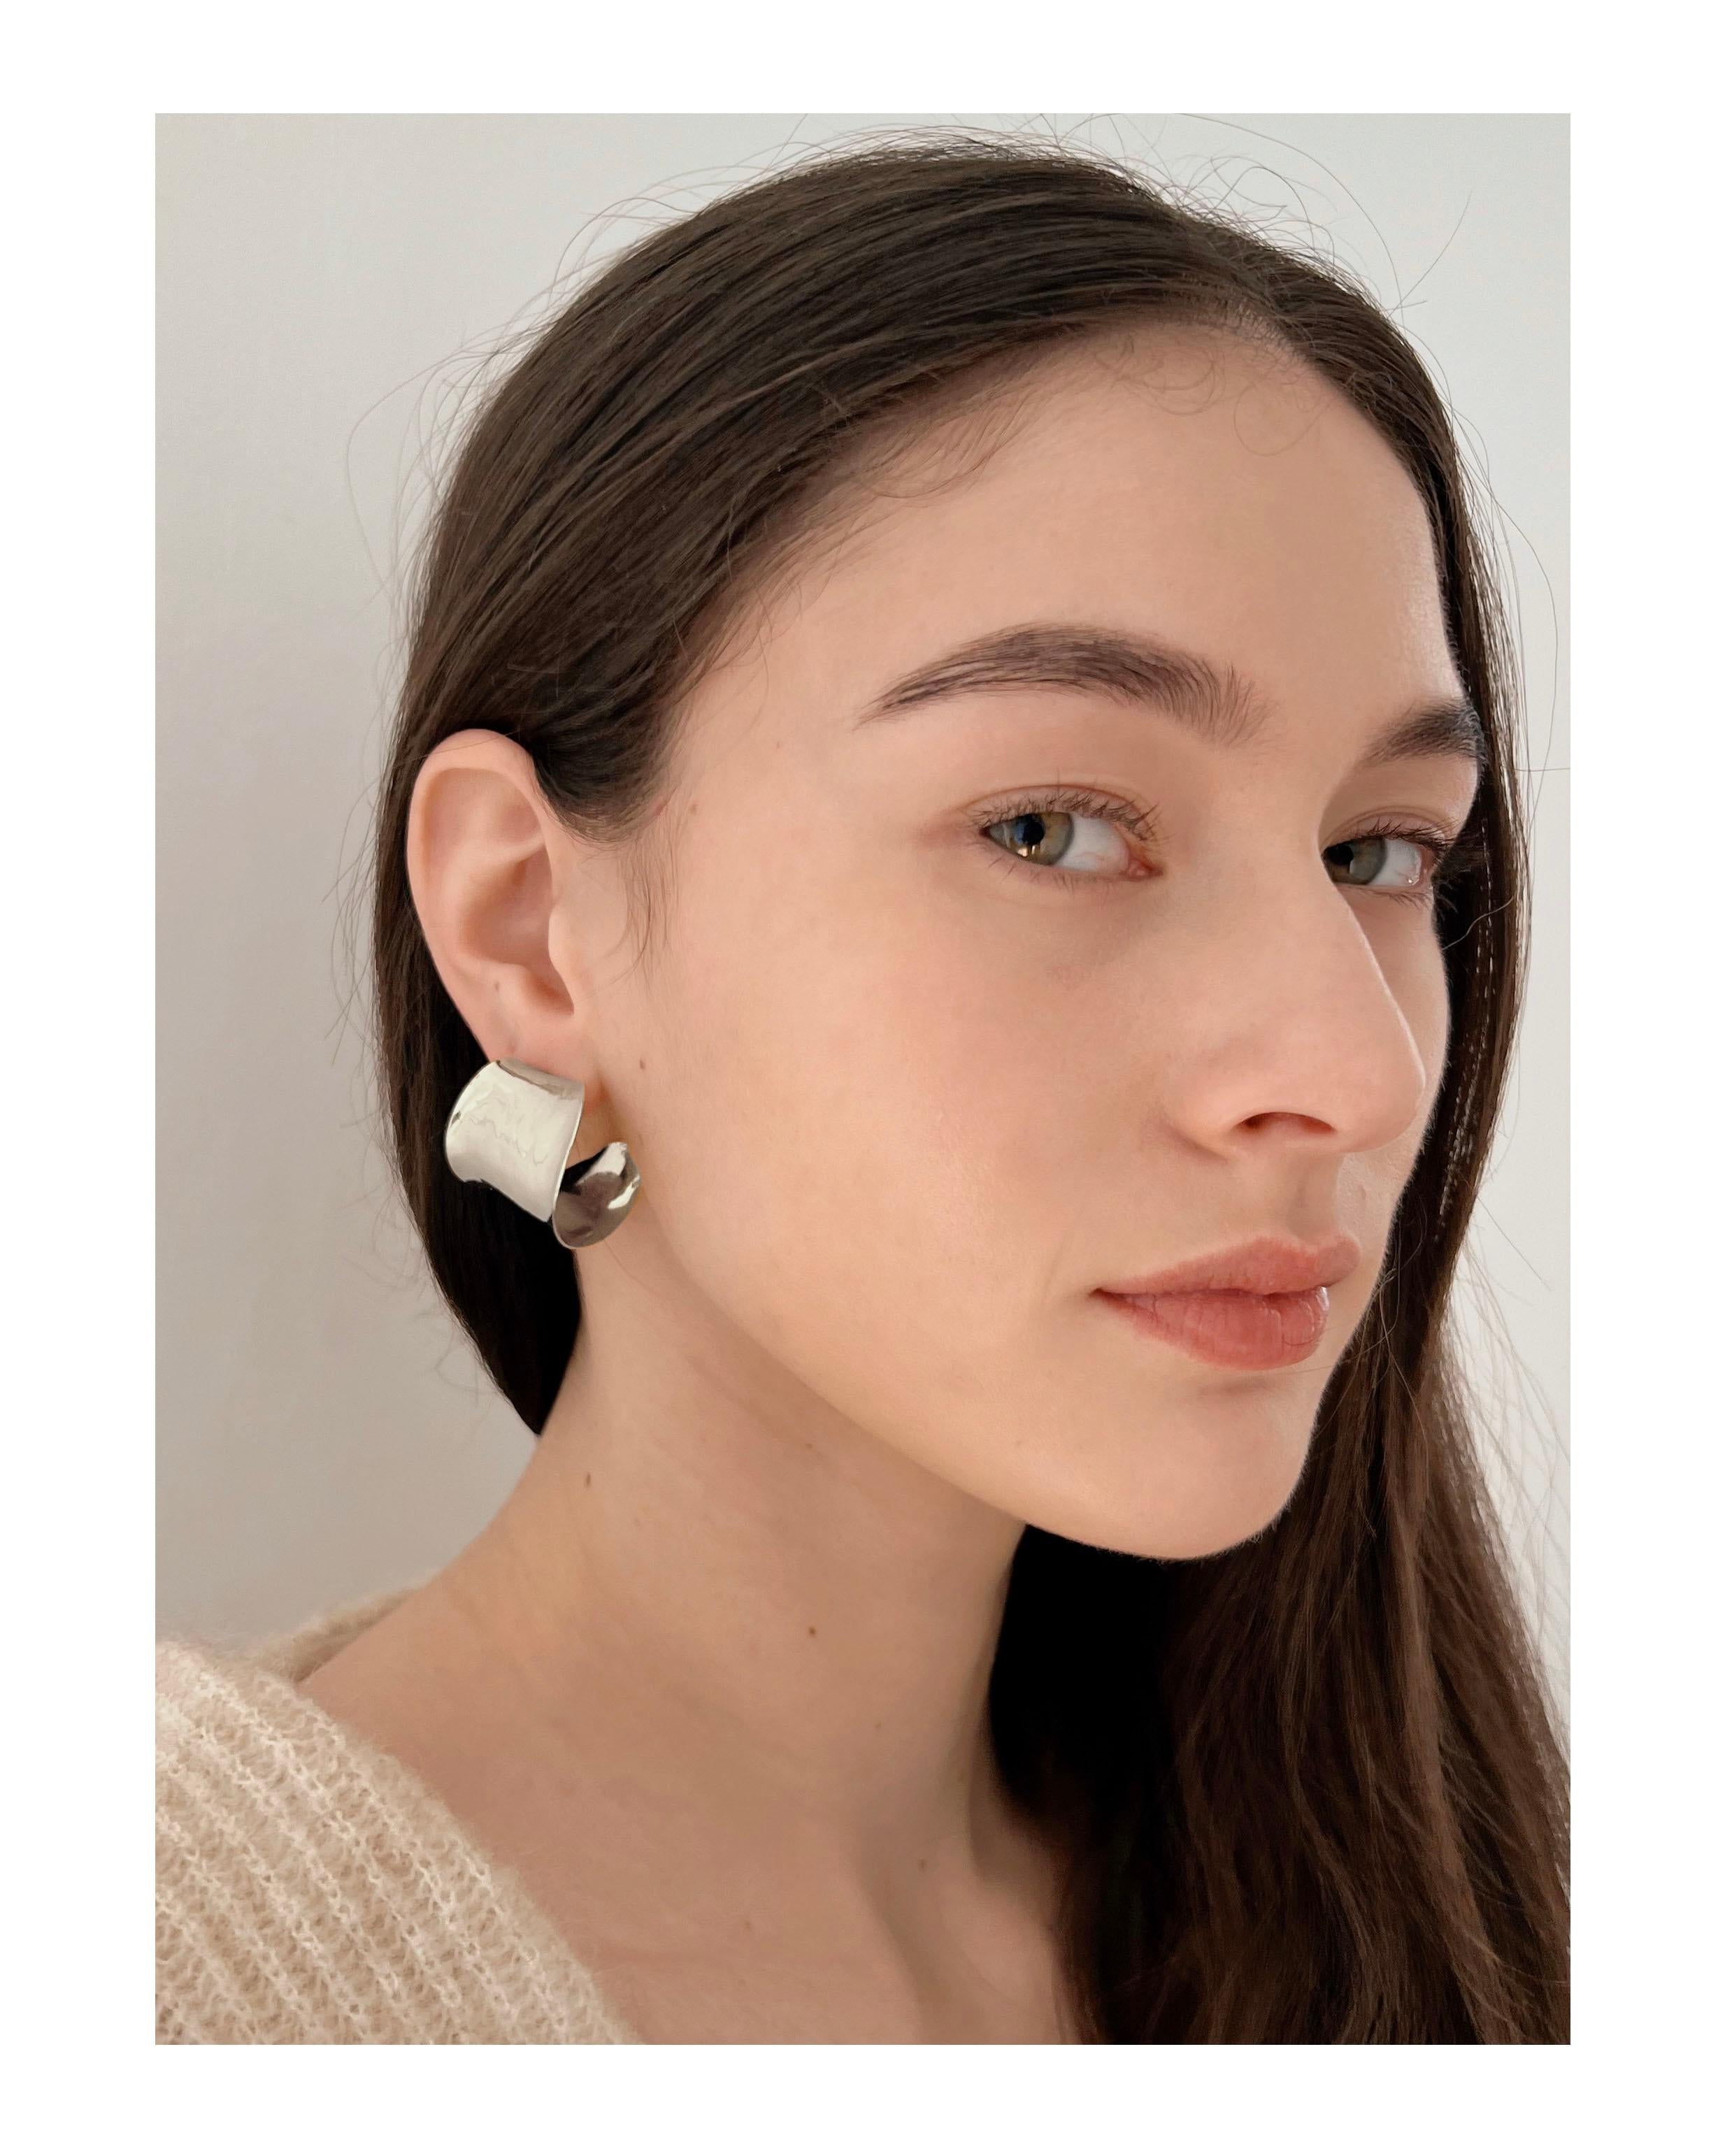 Fay Andrada's Hilma Hoops are a modern, sculptural take on a classic earring. With subtle curves and hand finishing these hoops suit special occasions and every day wear. 

The earrings are cast by hand, in recycled sterling silver. The finish is a